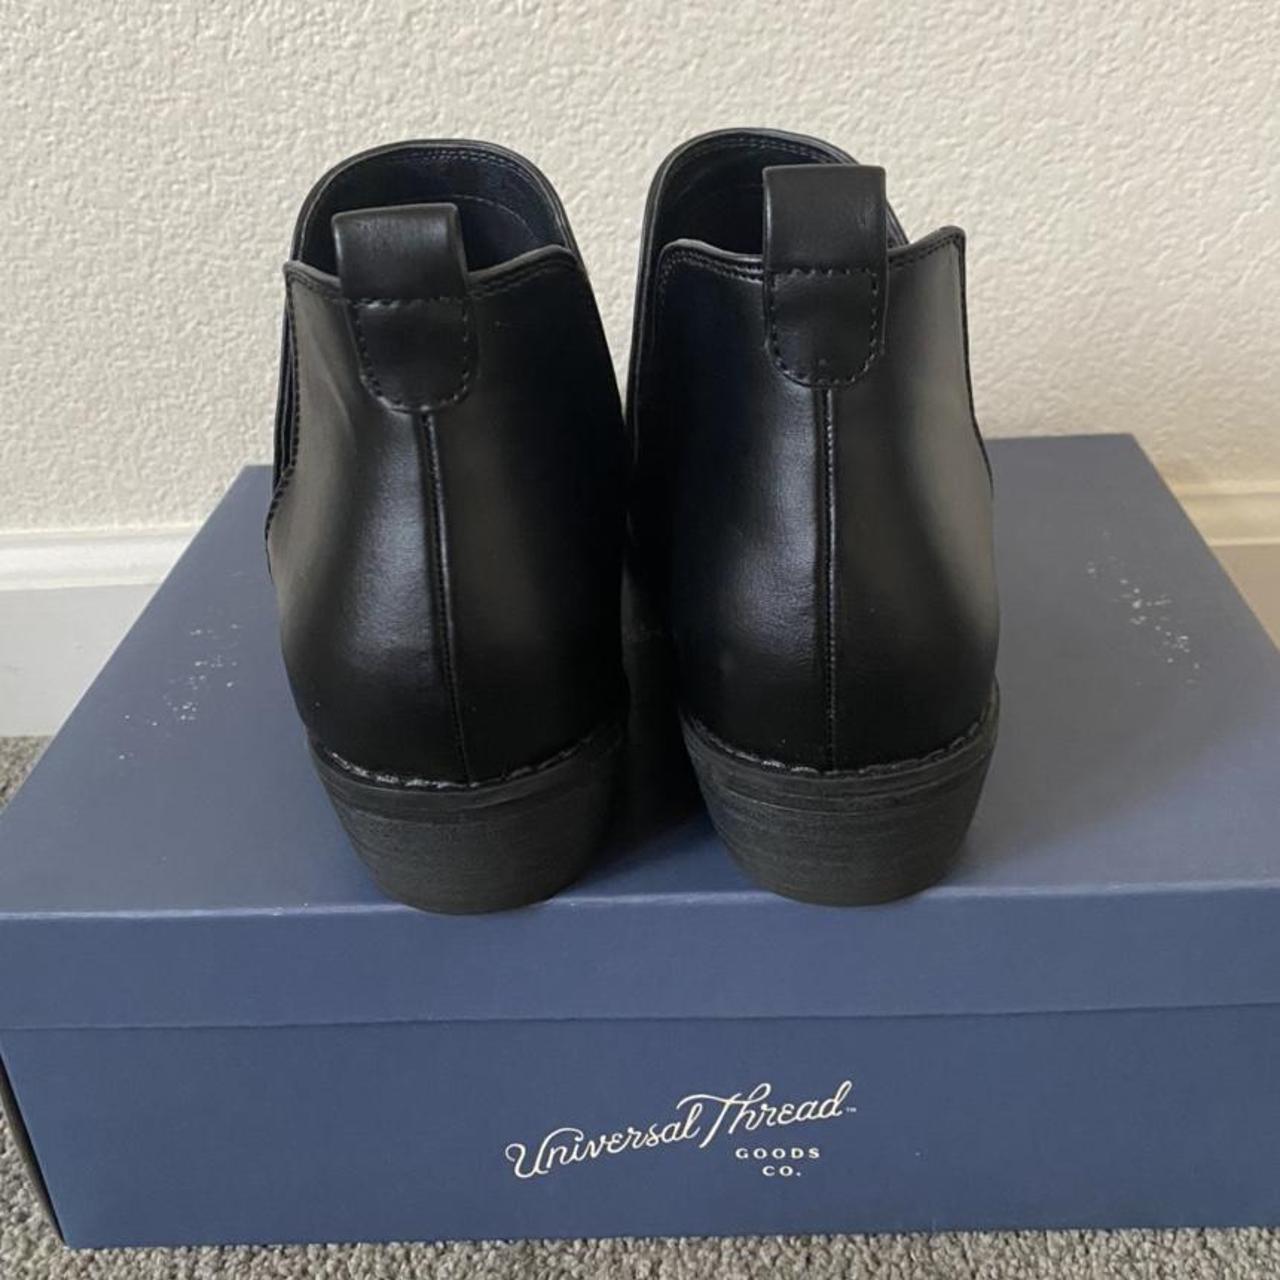 LV Creeper Ankle Boot Size 8UK. Never worn, DS. Item - Depop